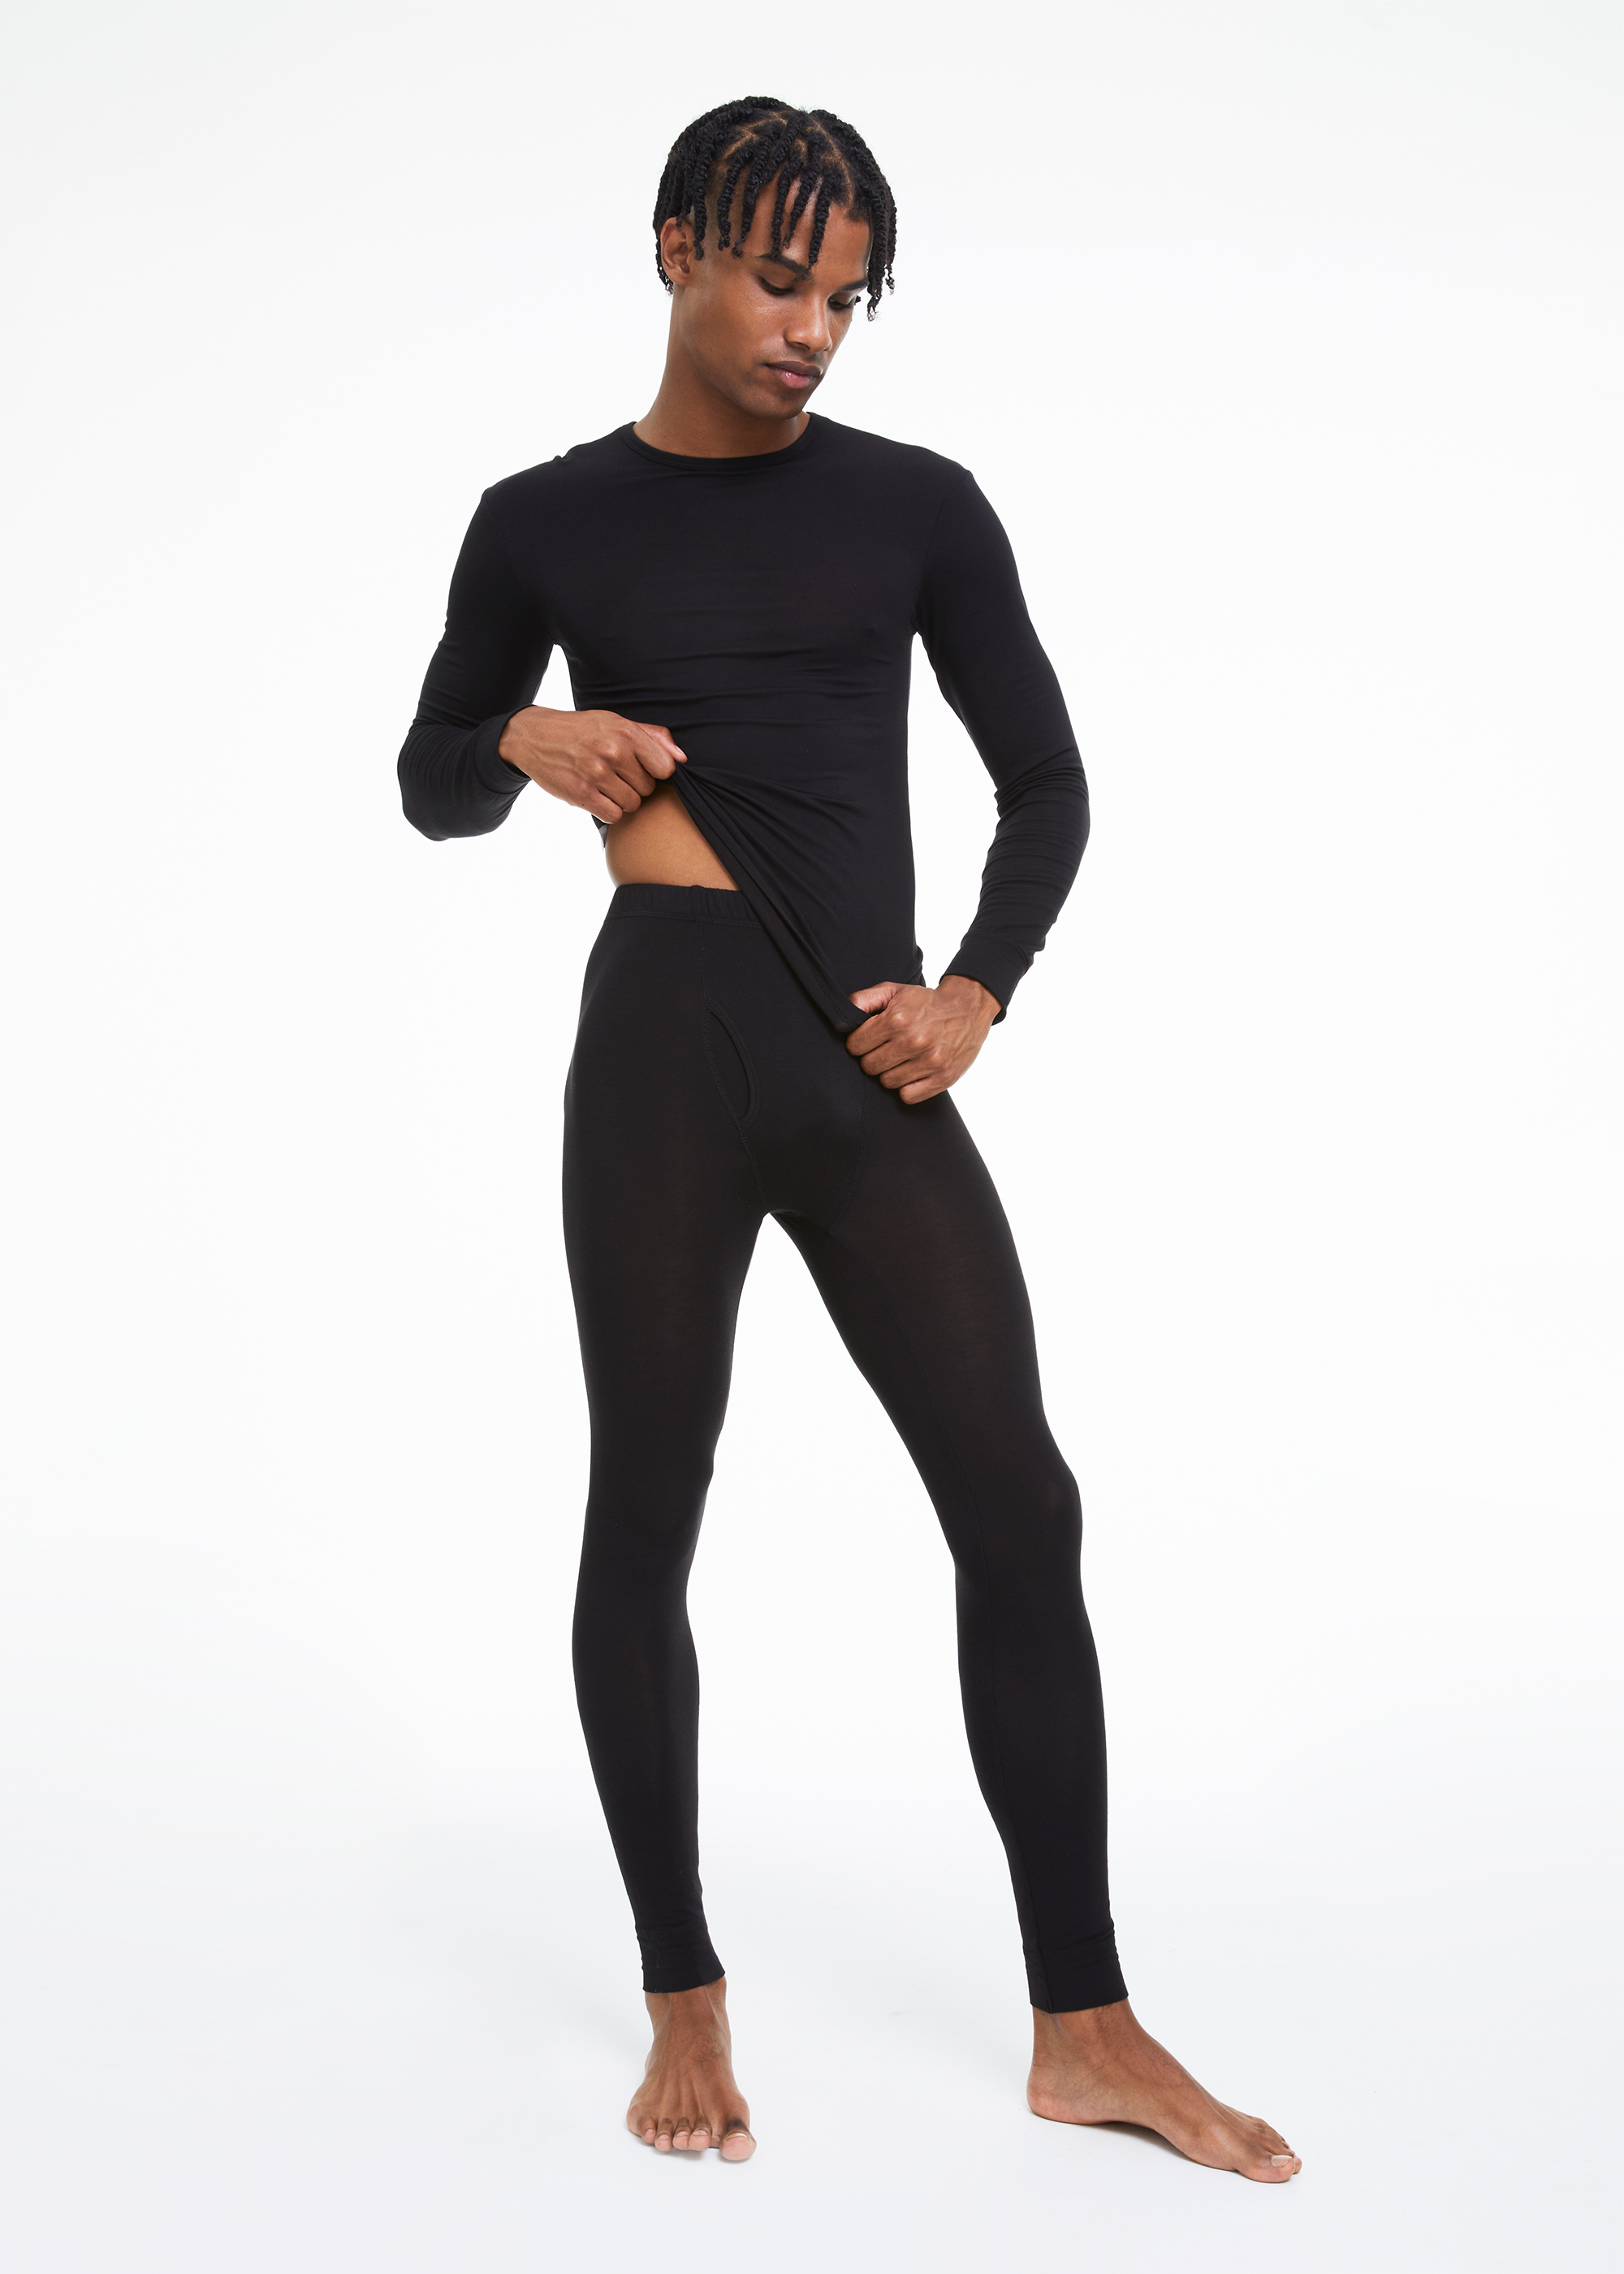 Electric Heated Thermal Underwear Set for Men Women,Electric Body